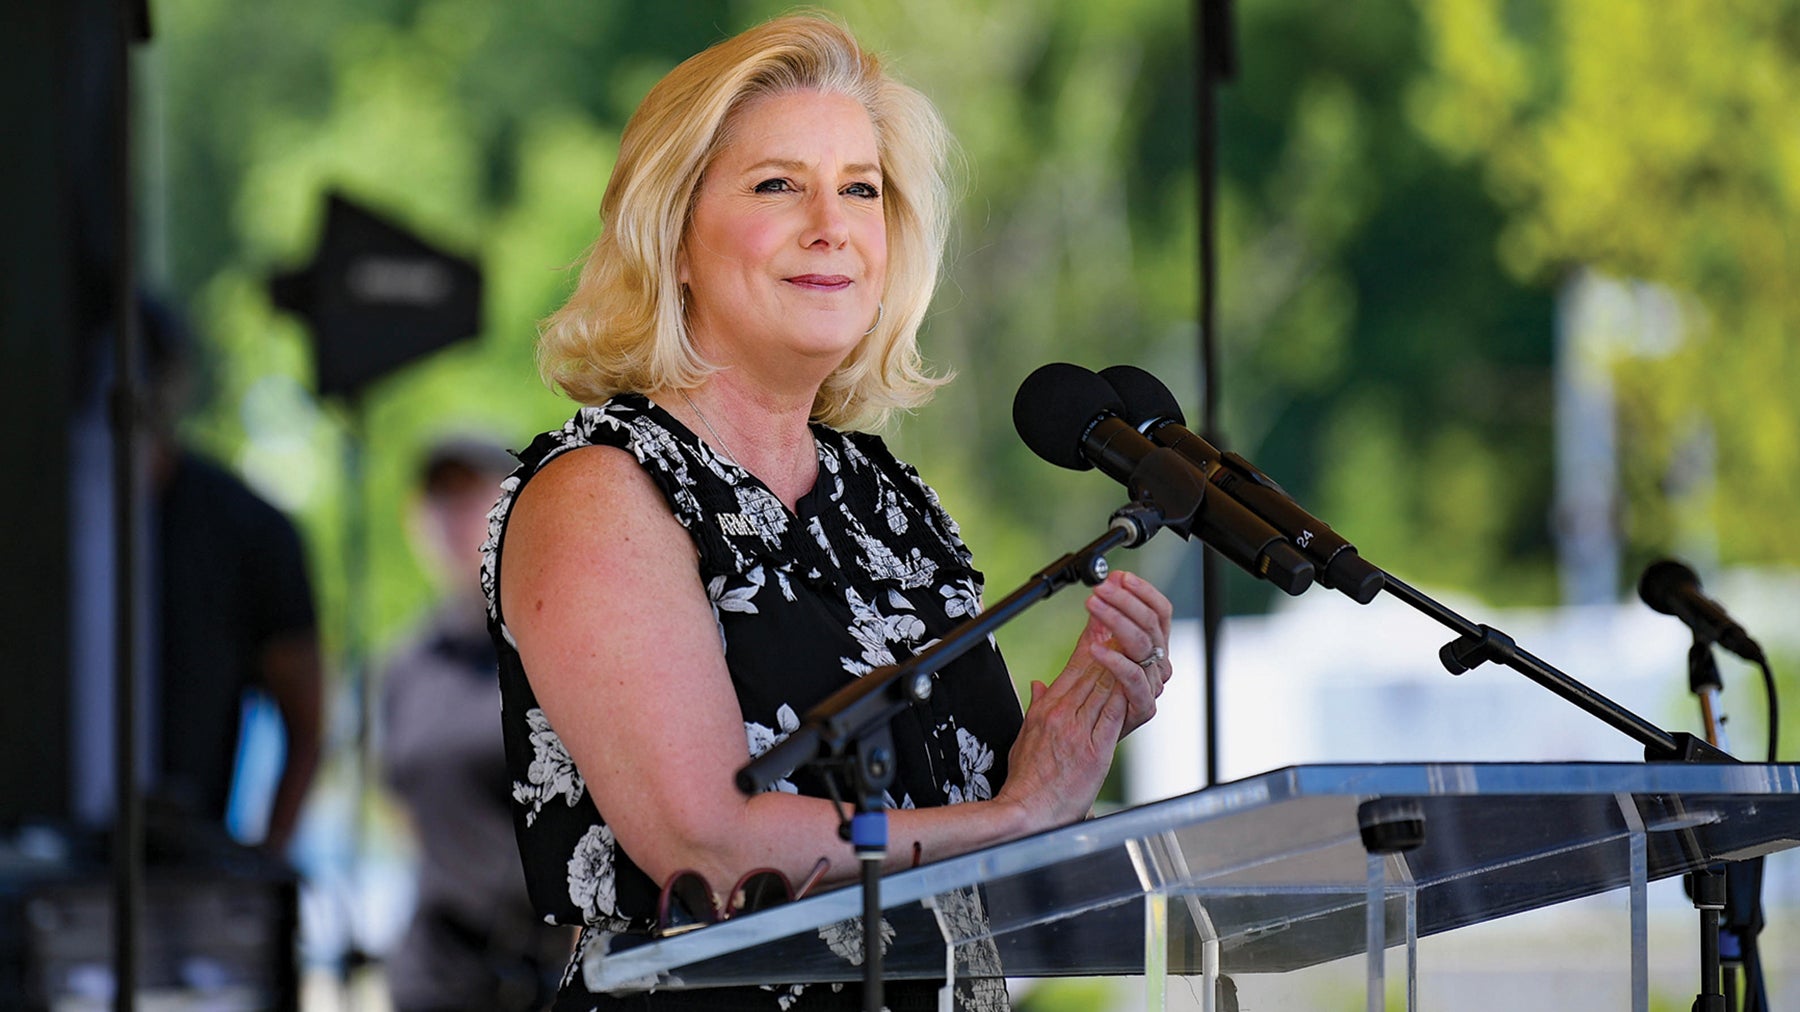 Army Secretary Christine Wormuth speaks at the Army Birthday Festival at the National Museum of the United States Army, Fort Belvoir, Virginia.(Credit: U.S. Army/Sgt. David Resnick)